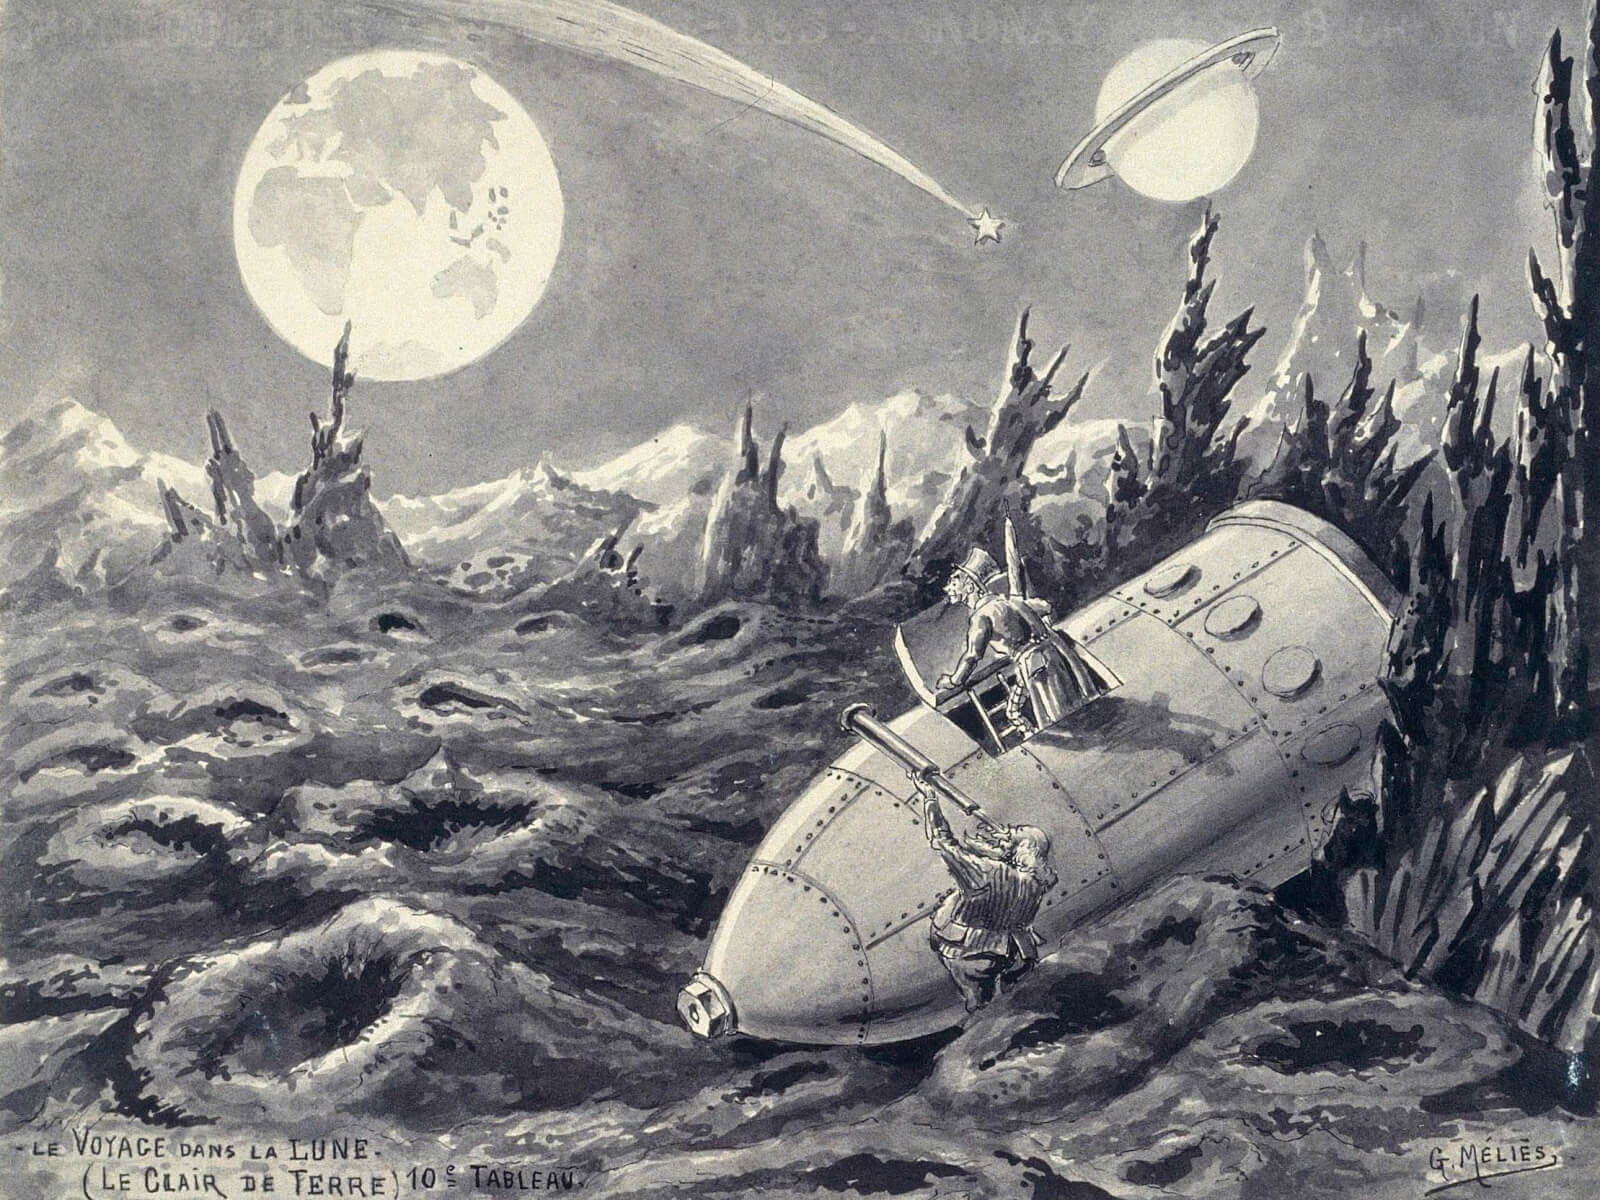 A rendition of a spaceship on the moon from the movie A Trip to the Moon